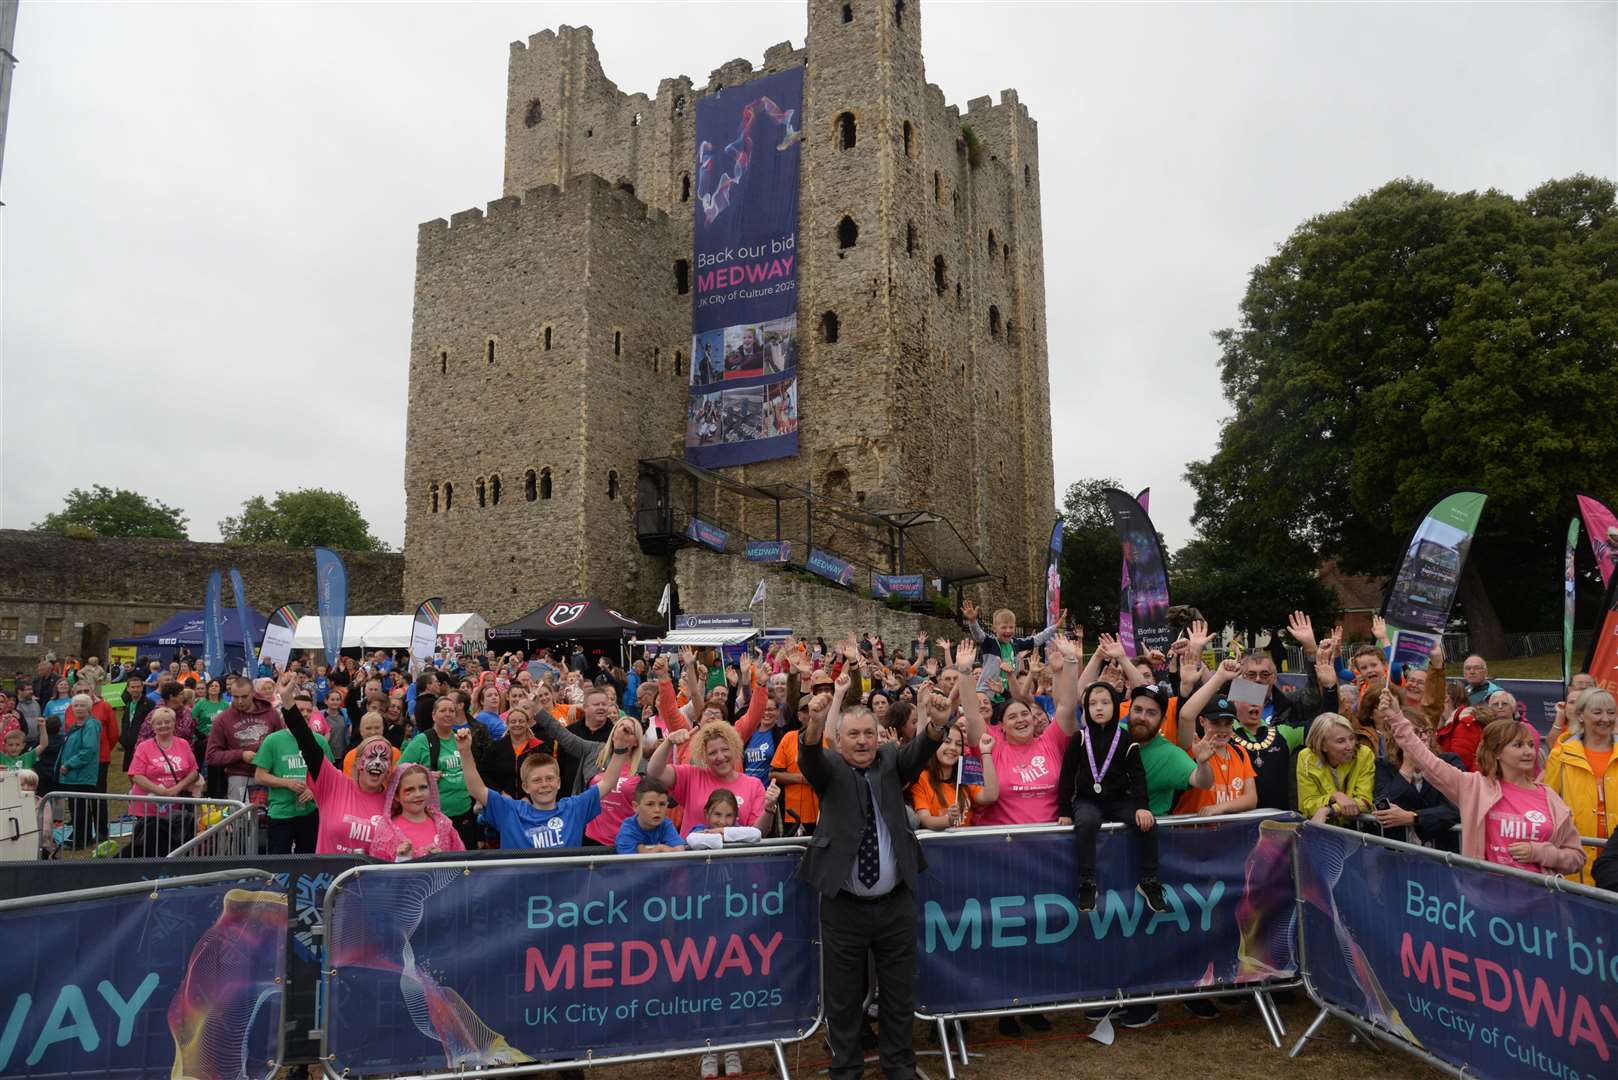 Council leader Cllr Alan Jarrett announces Medway's bid to be the UK City of Culture at the Medway Mile event at Rochester Castle in 2019